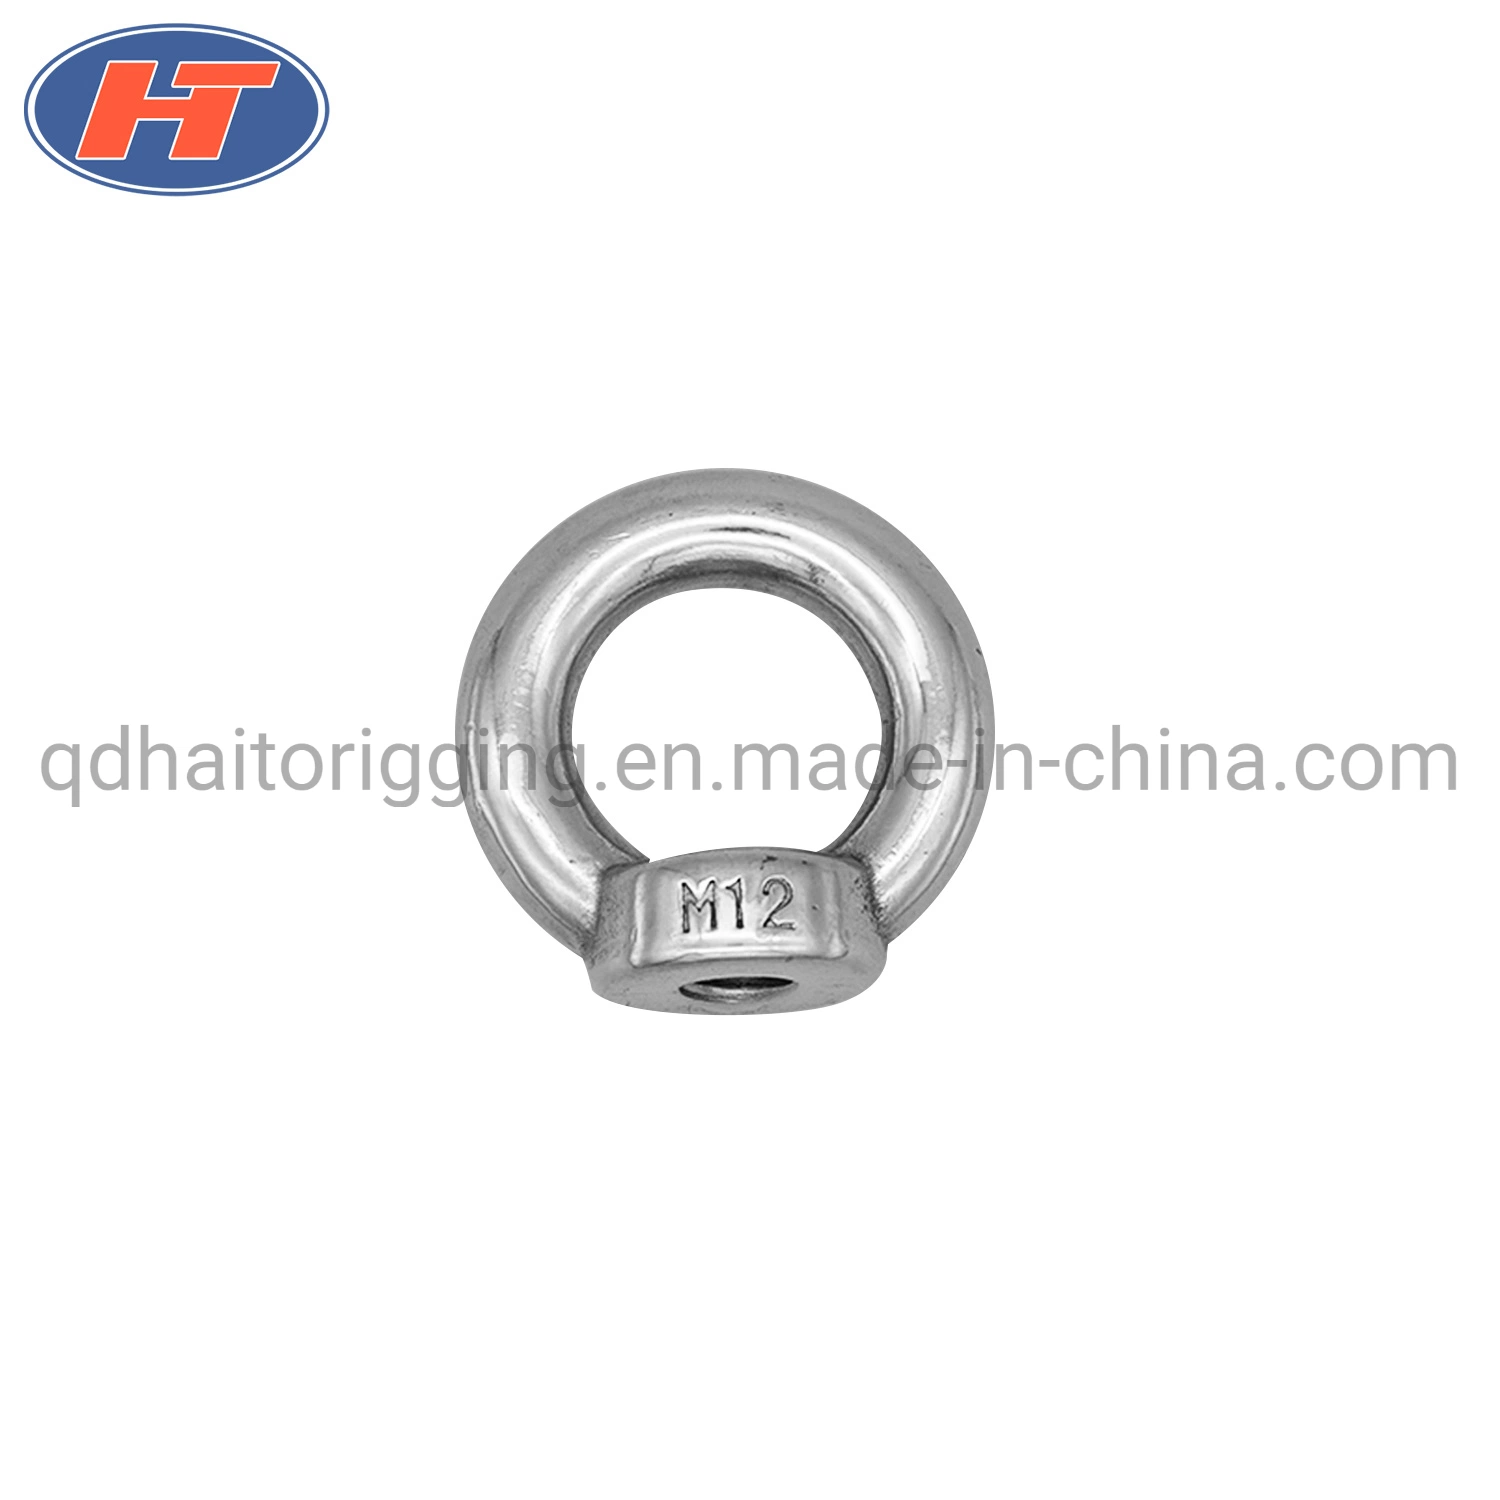 Stainless Steel 304/316 DIN580 Lifting Eye Bolt of Rigging Hardware